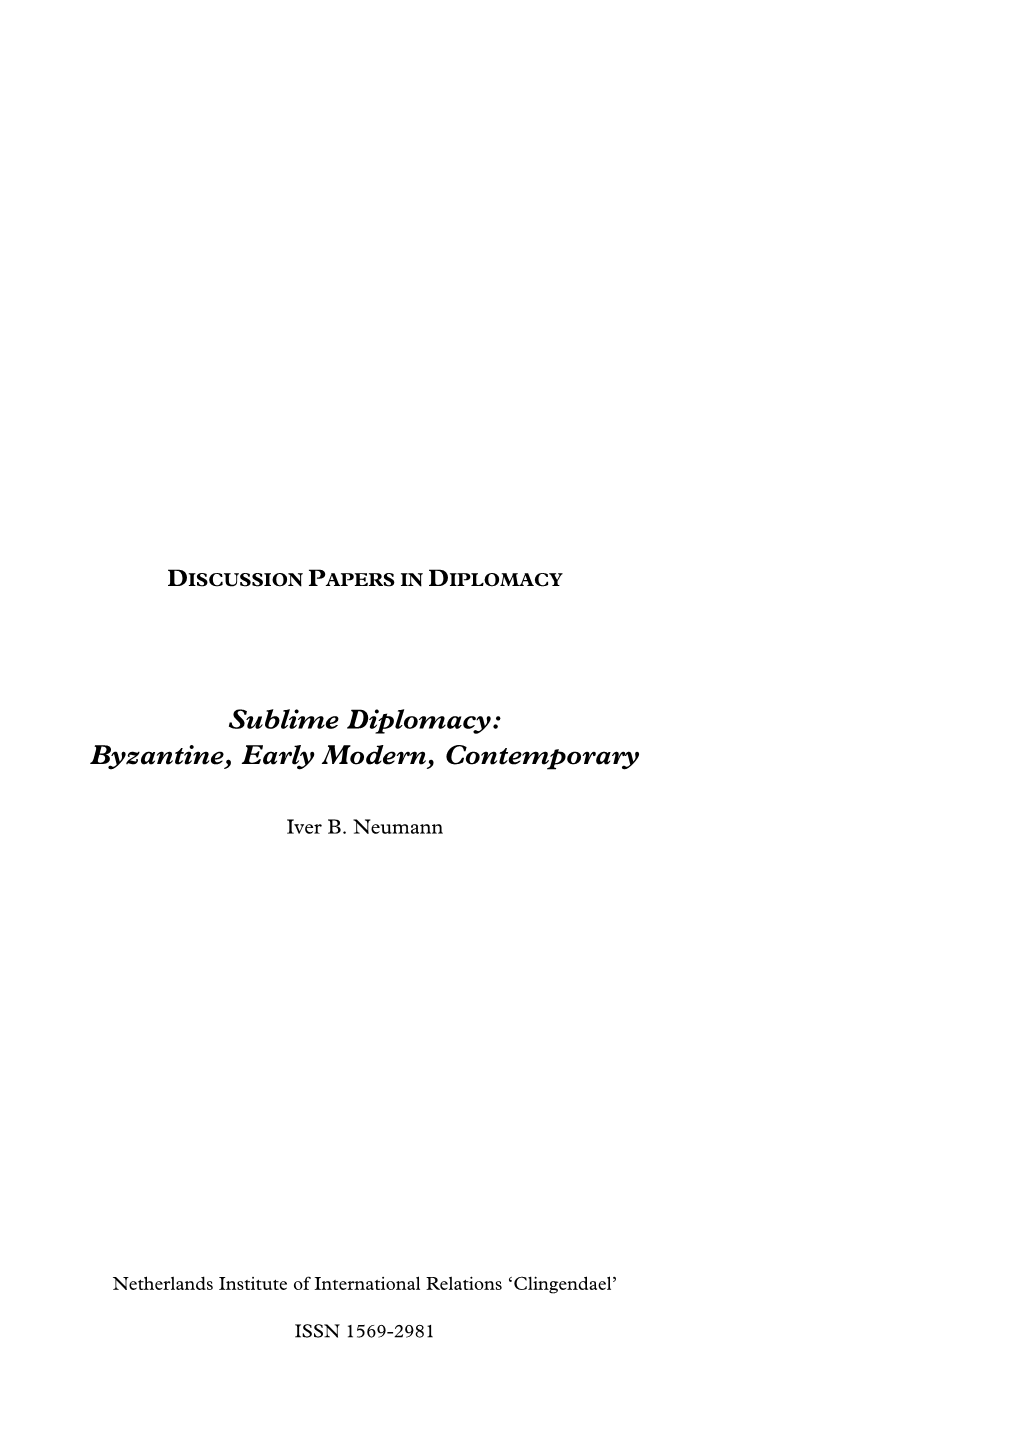 Sublime Diplomacy: Byzantine, Early Modern, Contemporary